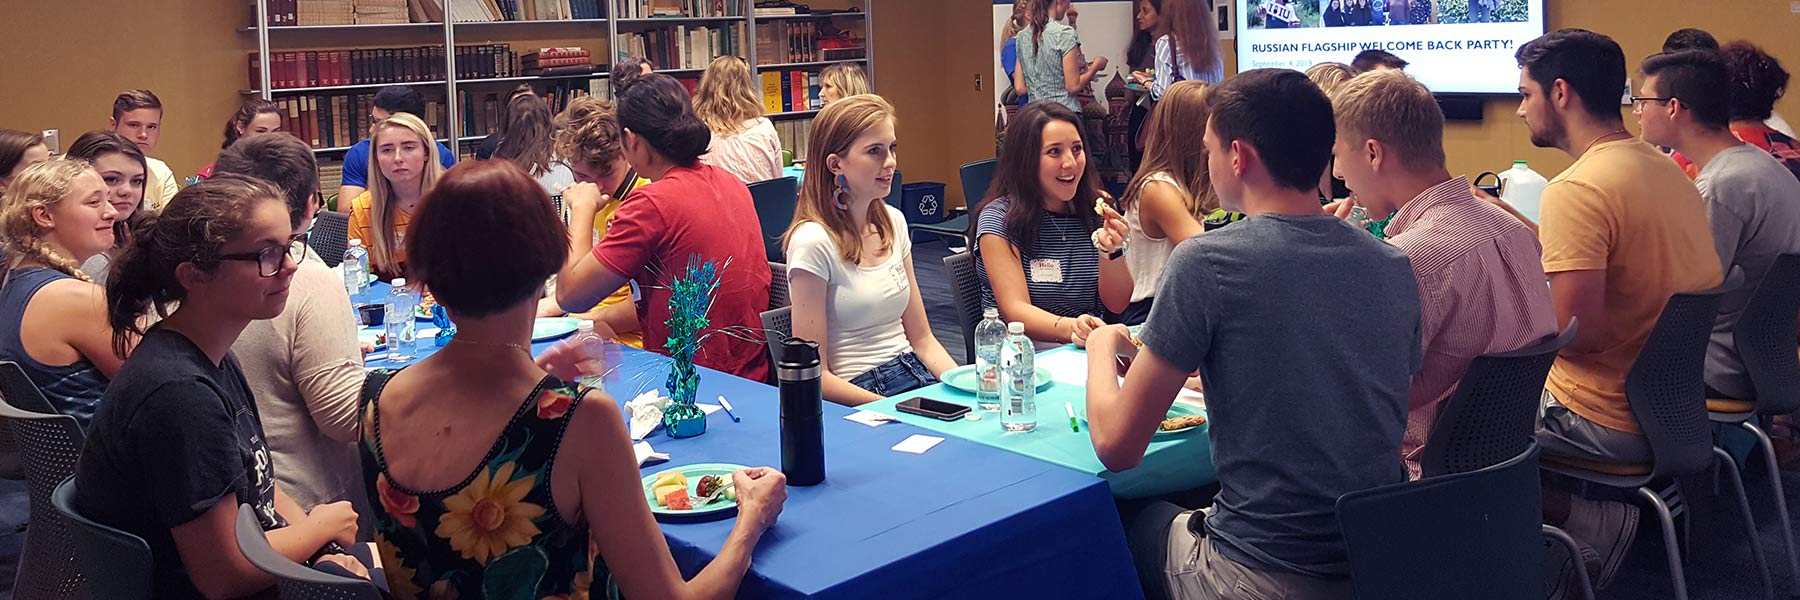 Students and staff sit around a table socializing at a Russian Flagship Program event